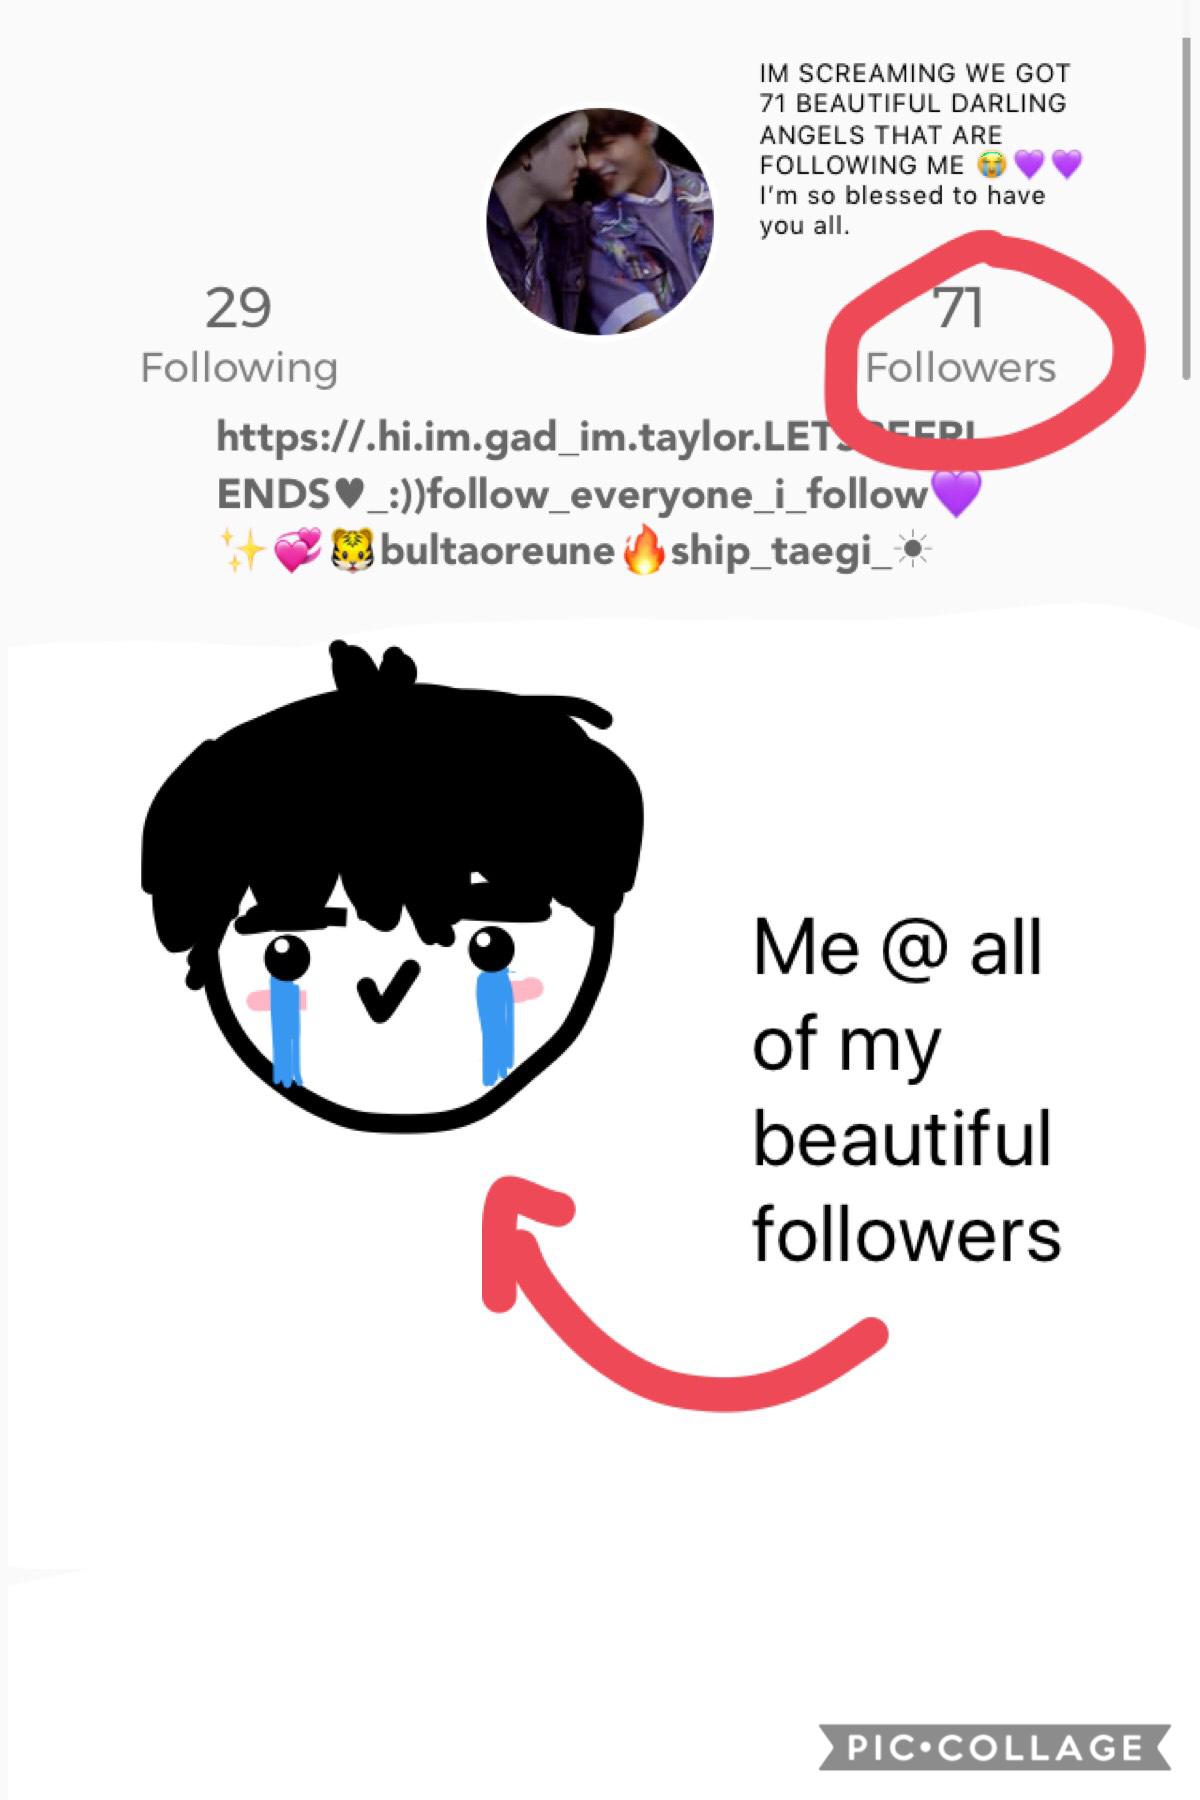 BROTATO TAP
YALL WE MADE IT TO 71 
AHH THE CLIMB TO 100 
(hopefully 🤧) ily all so much and I appreciate every single one of you who followed me :))💜💜I’m grateful for you lovelies 💜💜💜💜💜